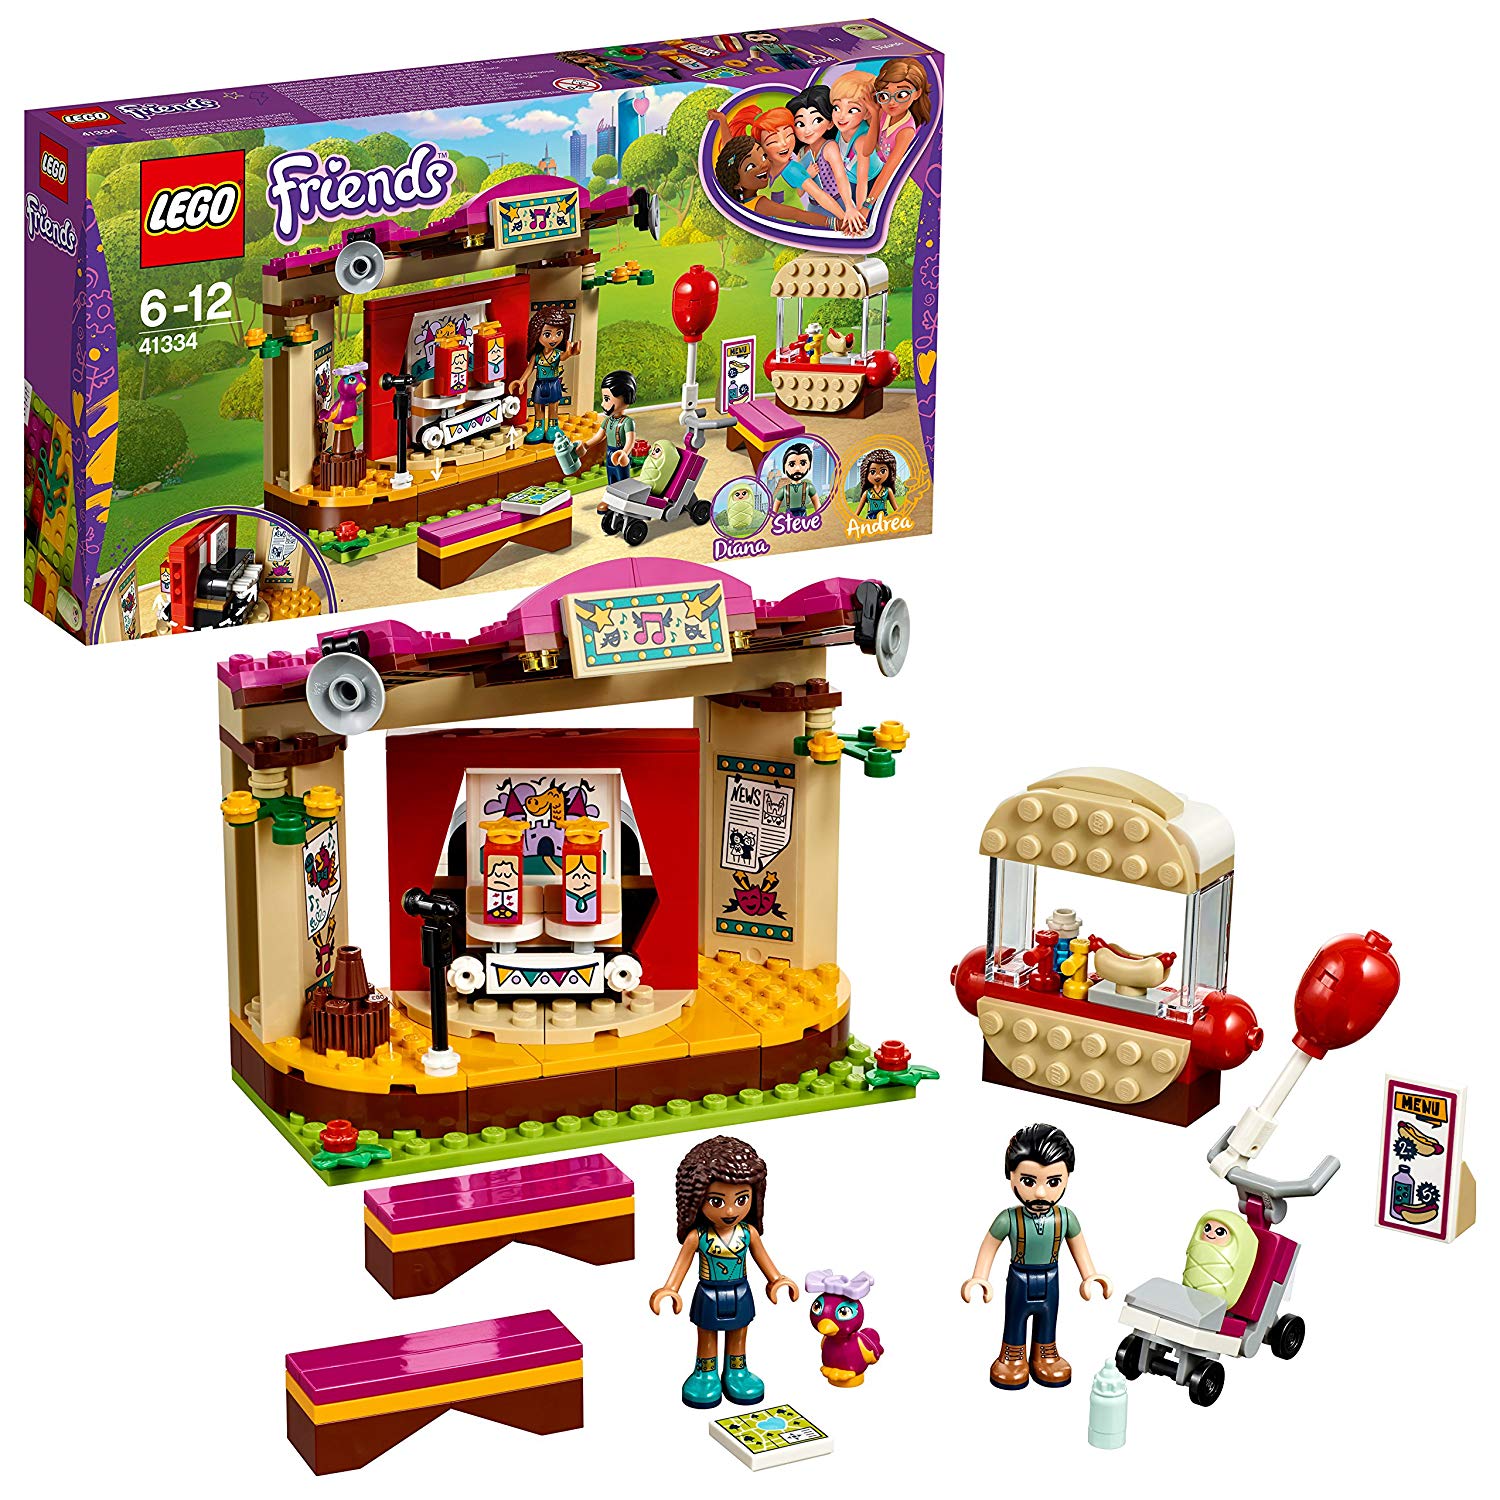 LEGO Friends Andreas Stage In The Park toys for boys and girls